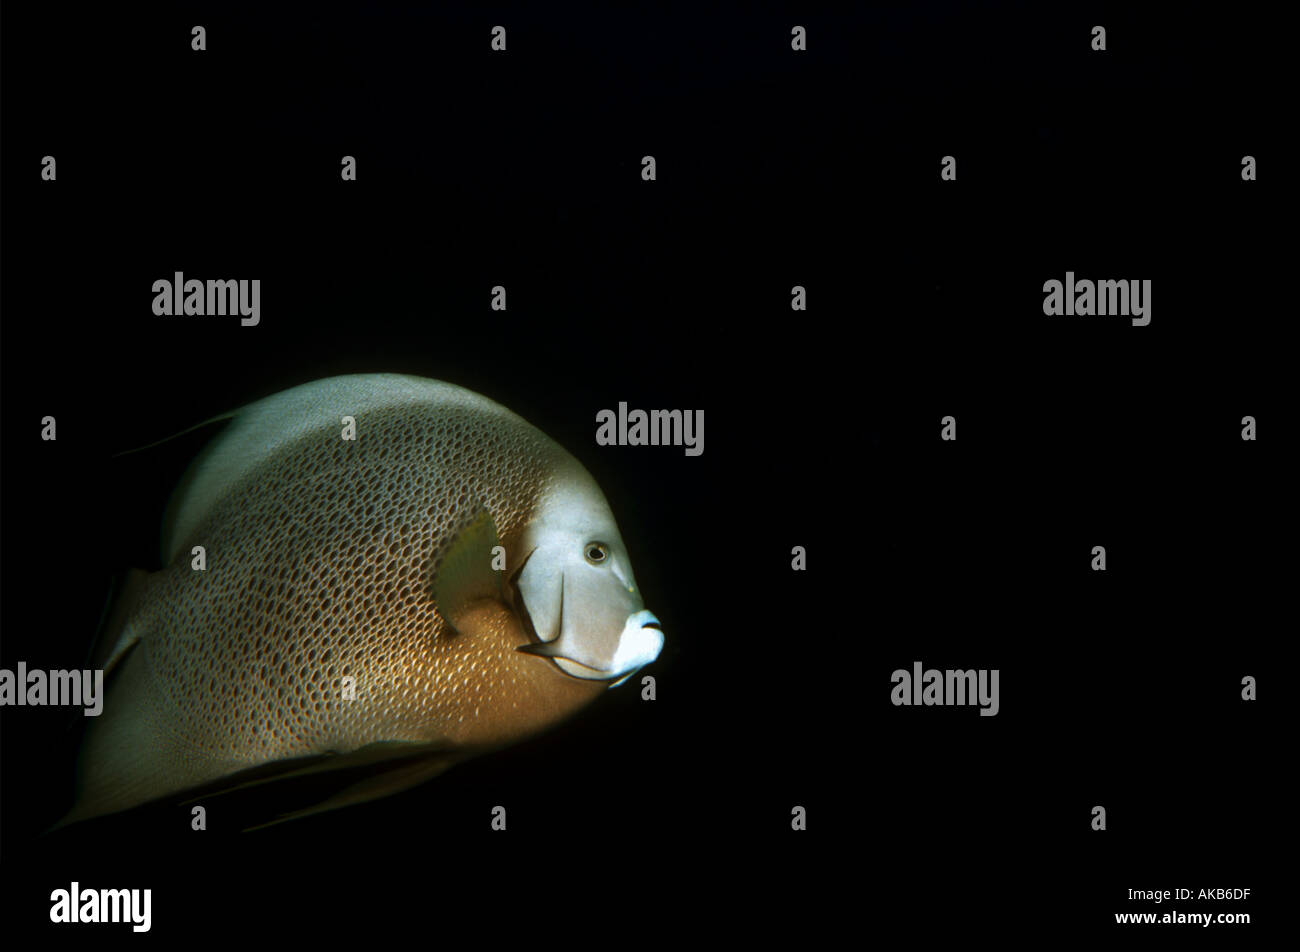 A swift gray angelfish turns and swims during a night dive in the Bahamas Stock Photo